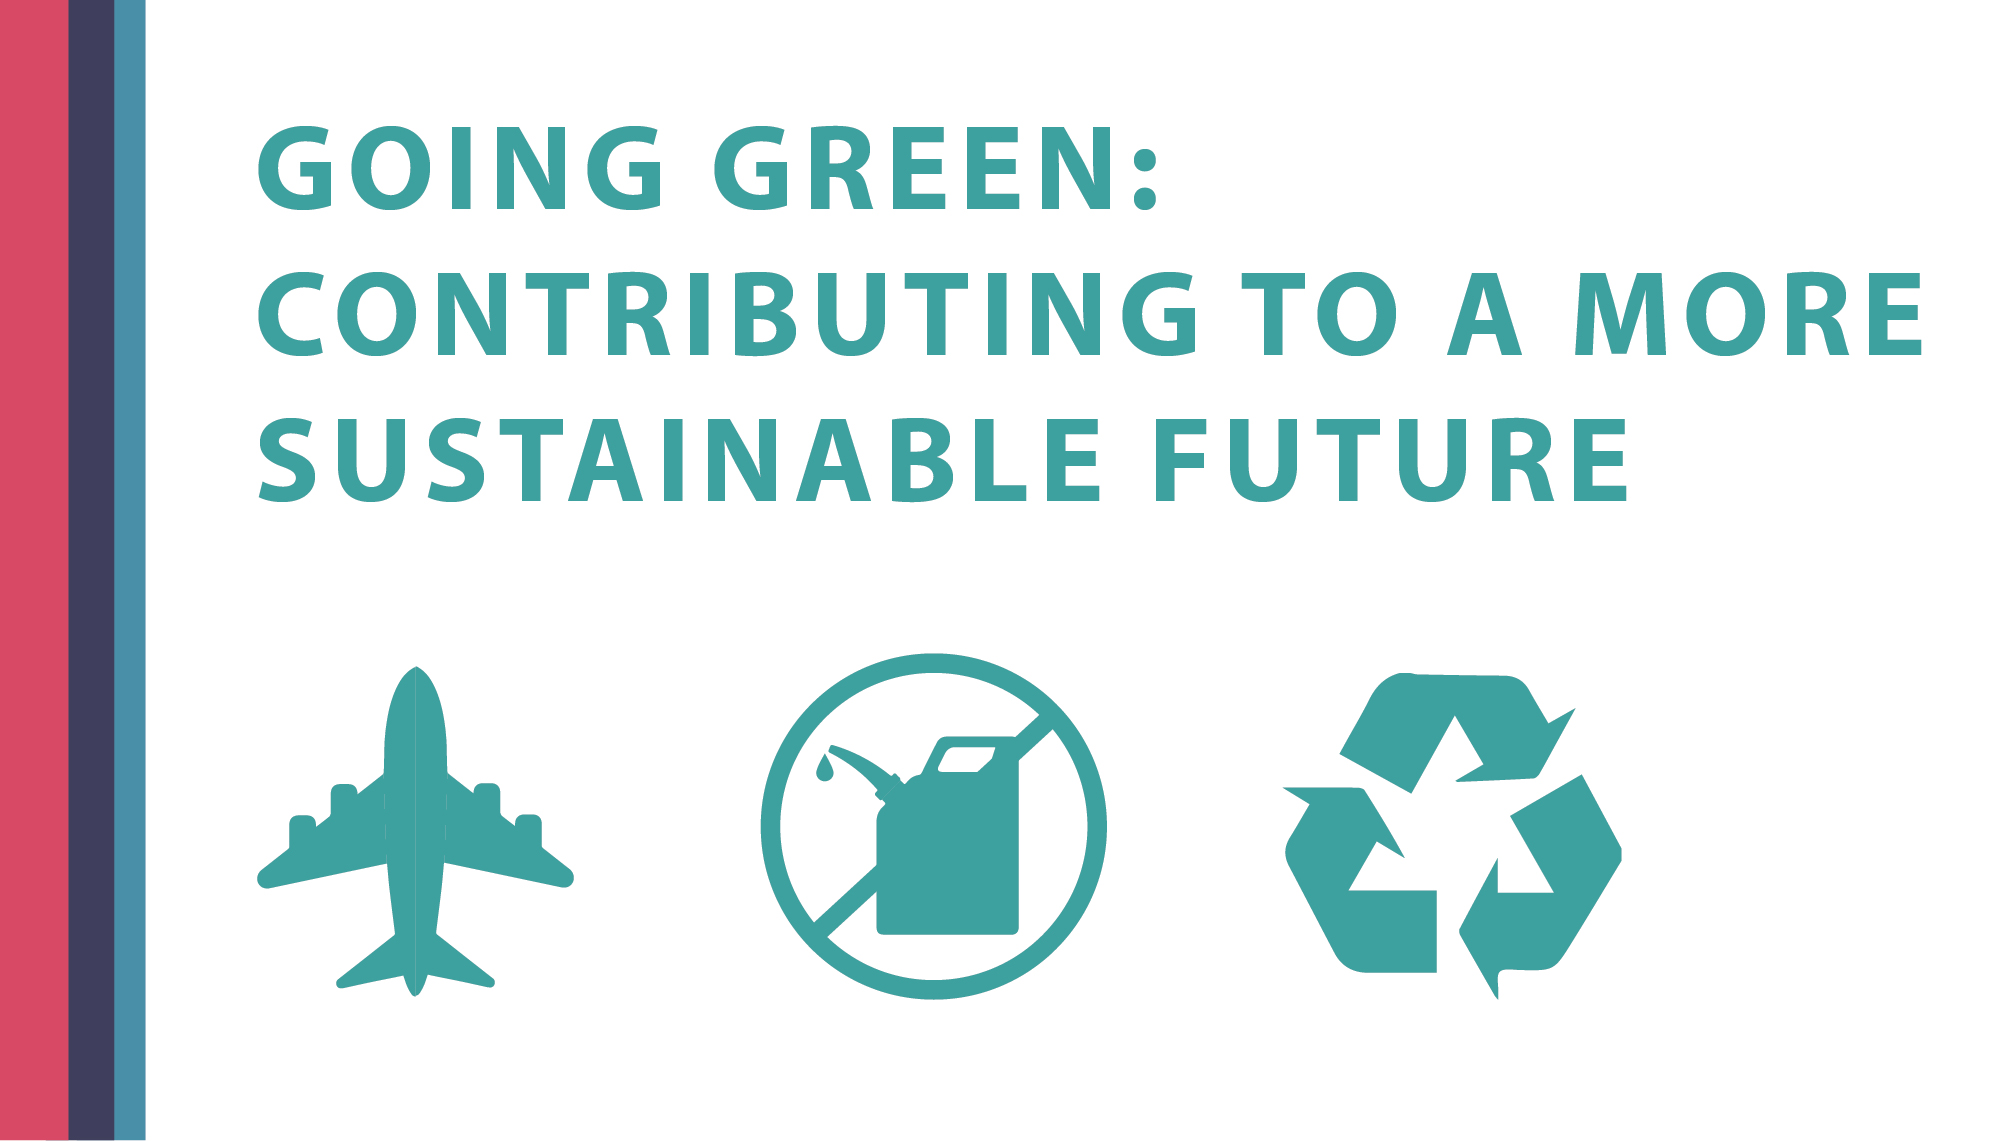 Going Green: Contributing to a More Sustainable Future